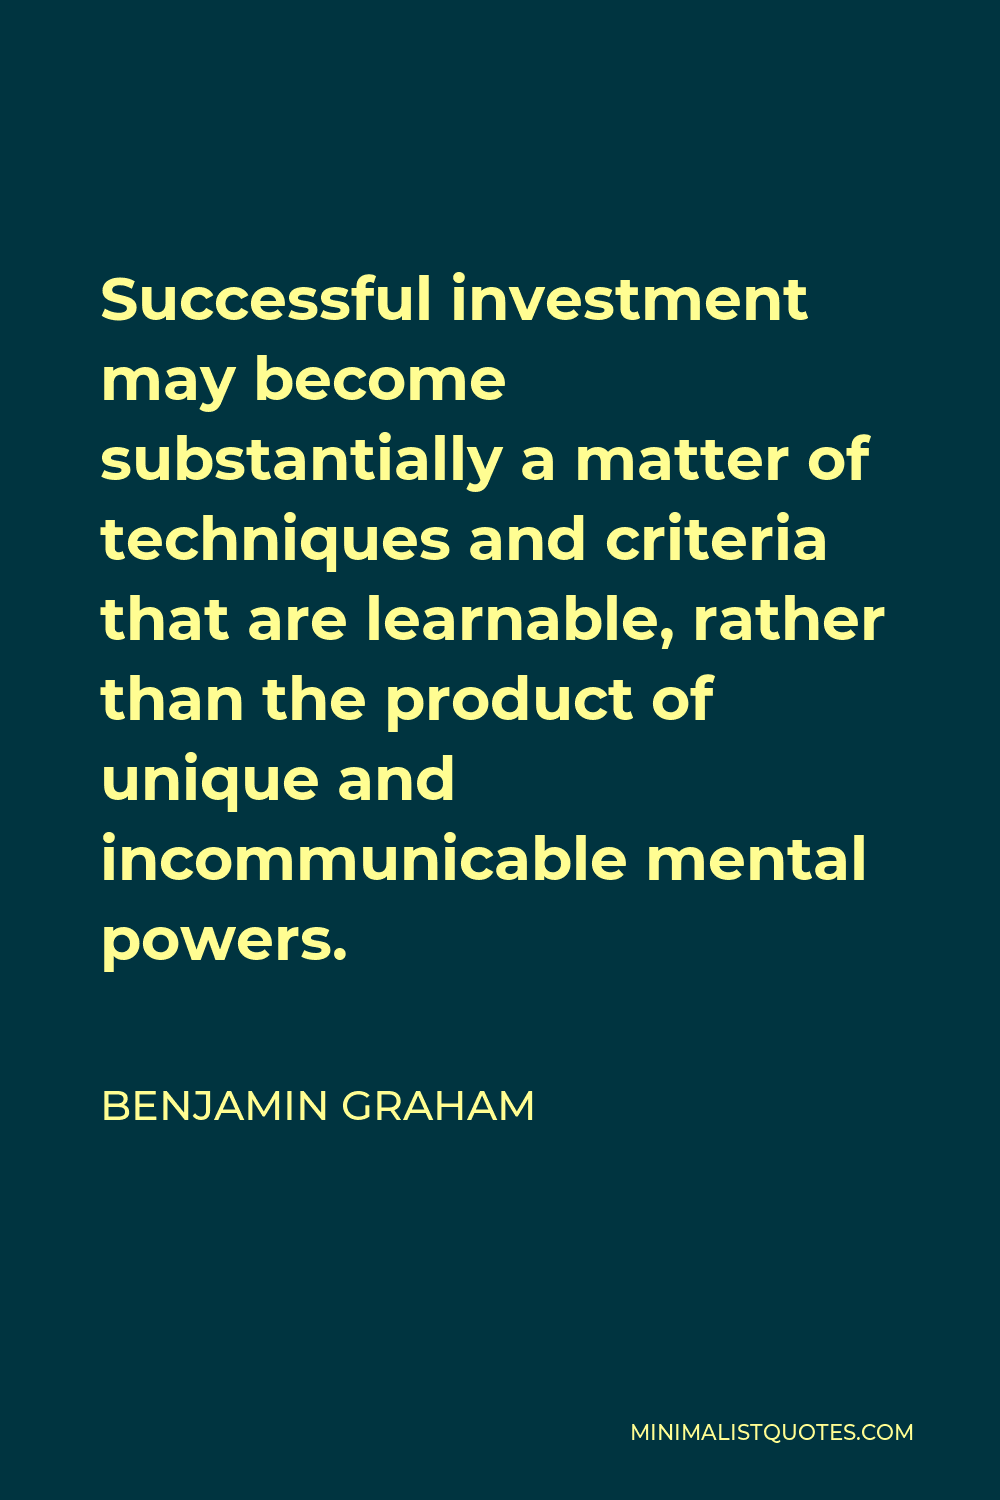 Benjamin Graham Quote - Successful investment may become substantially a matter of techniques and criteria that are learnable, rather than the product of unique and incommunicable mental powers.